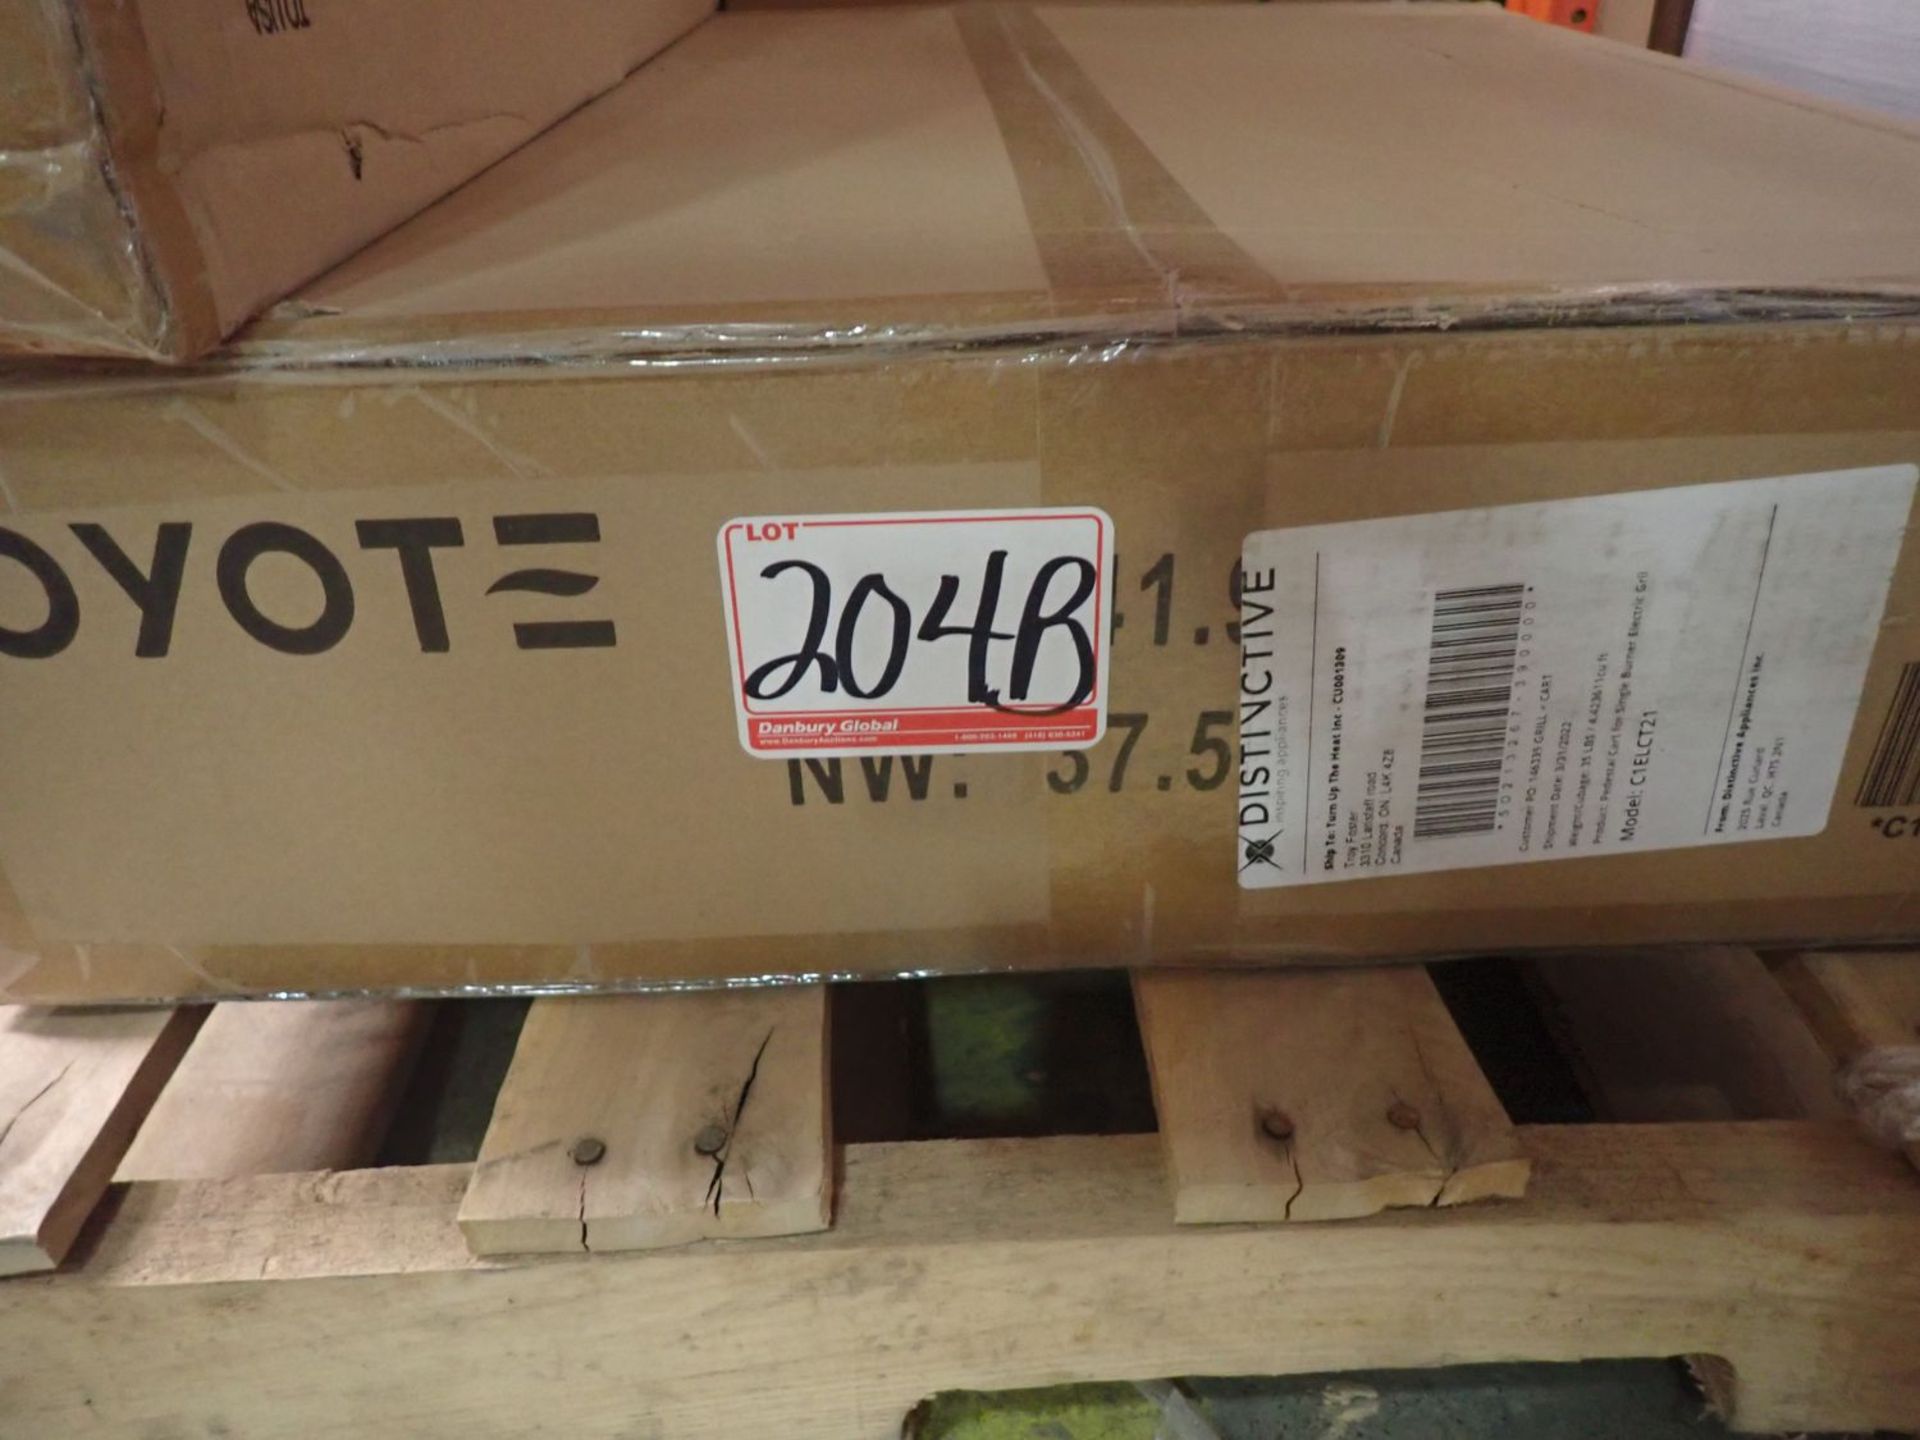 COYOTE (C1EL120SM) ELECTRIC GRILL W/ PEDESITAL (NEW IN BOX) (MSRP $1,800) - Image 2 of 2